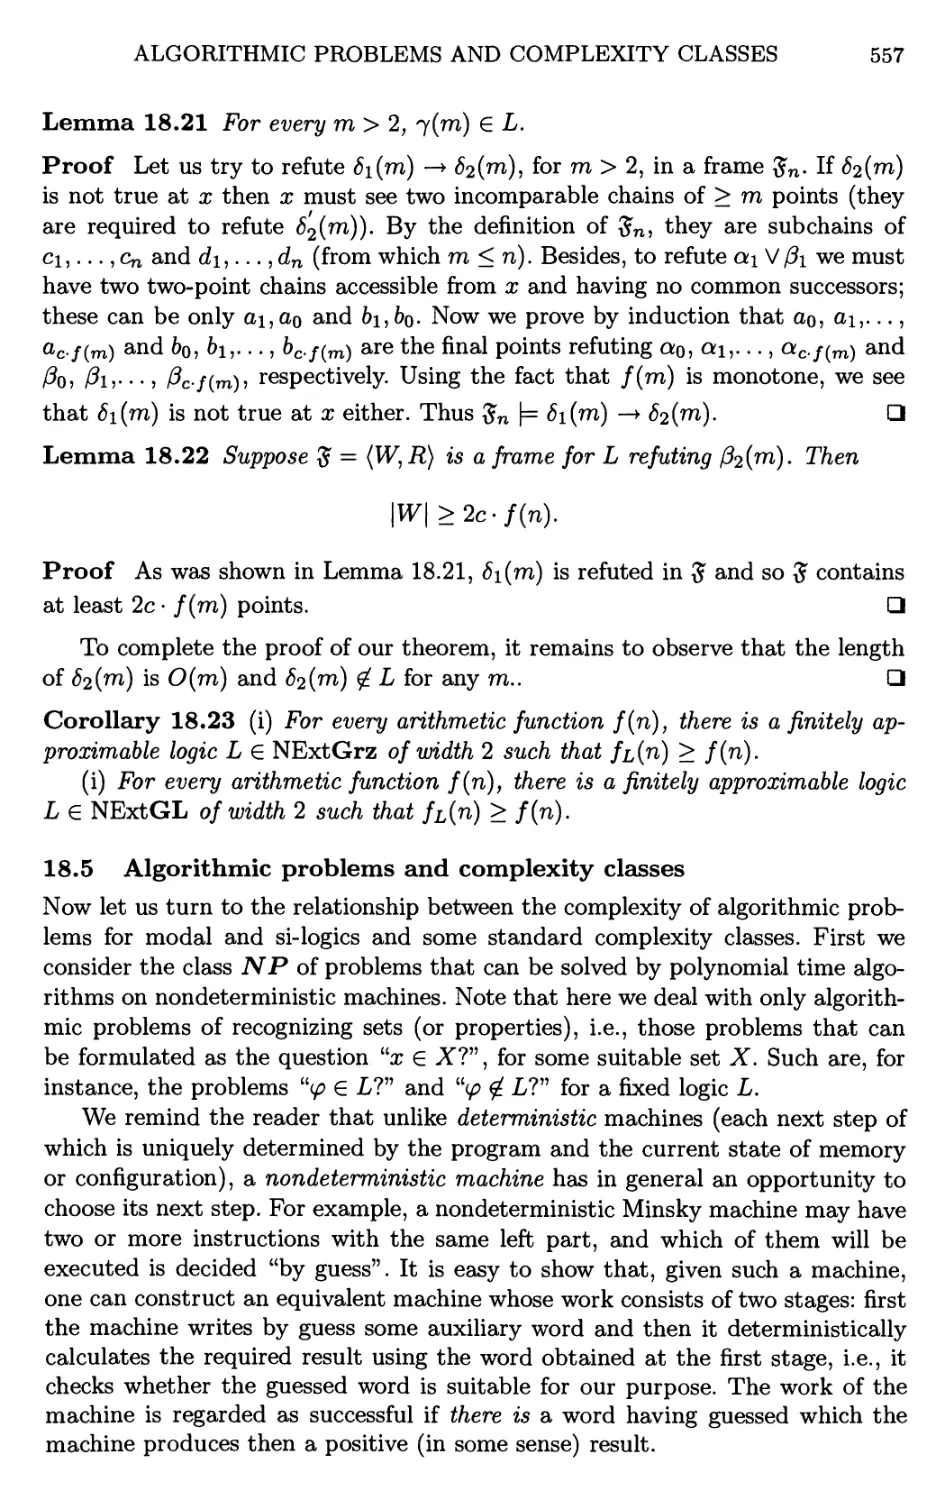 18.5 Algorithmic problems and complexity classes